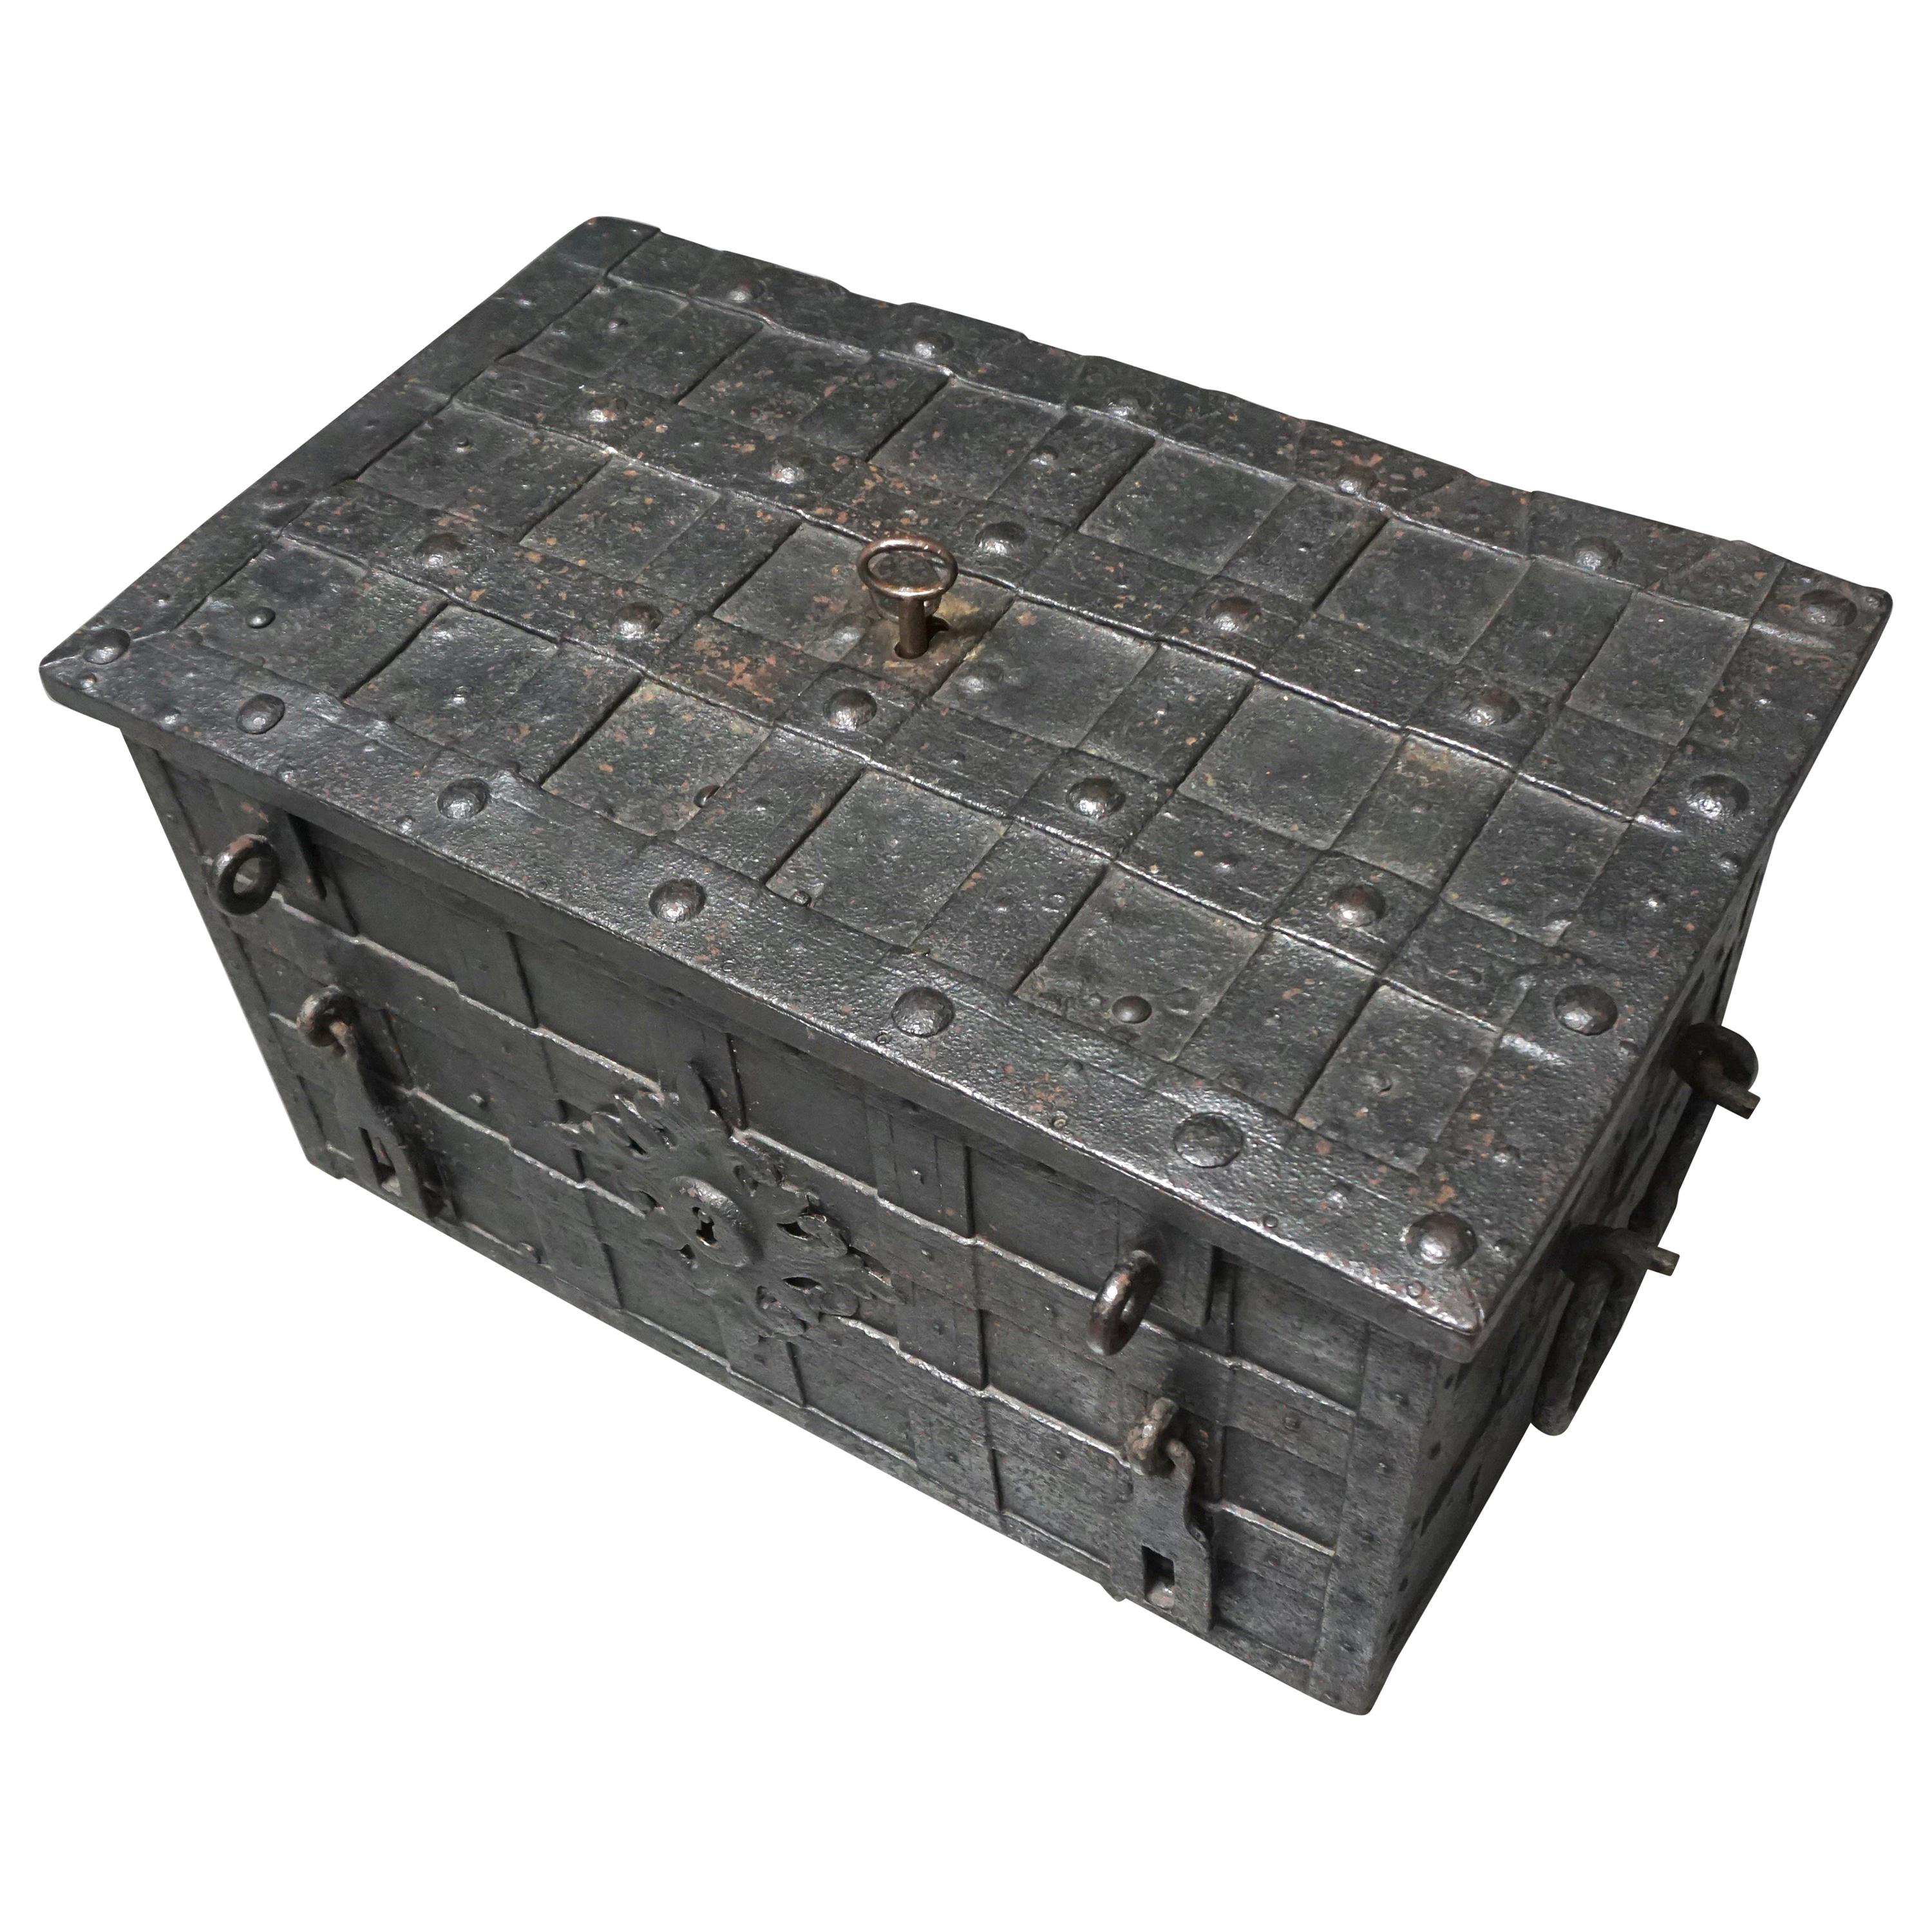 Nuremberg Late 17th Century Wrought Iron Strong Box with Elaborate Lock